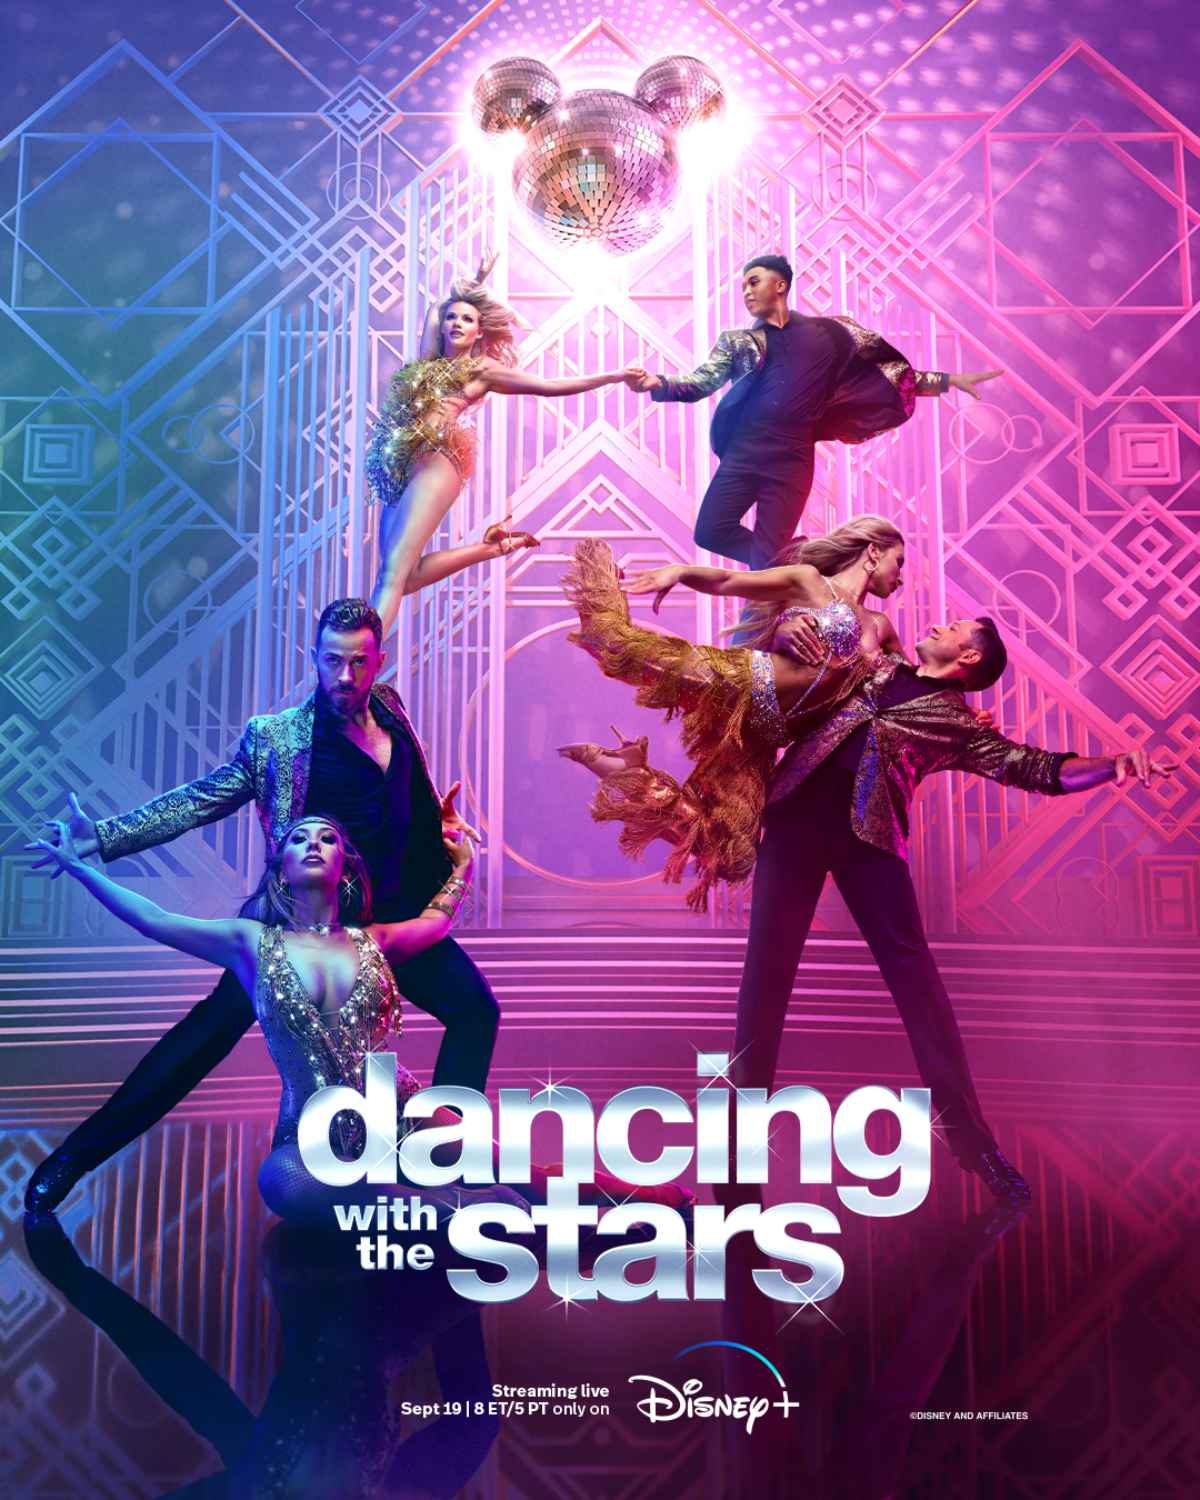 Dancing with the Star Cast